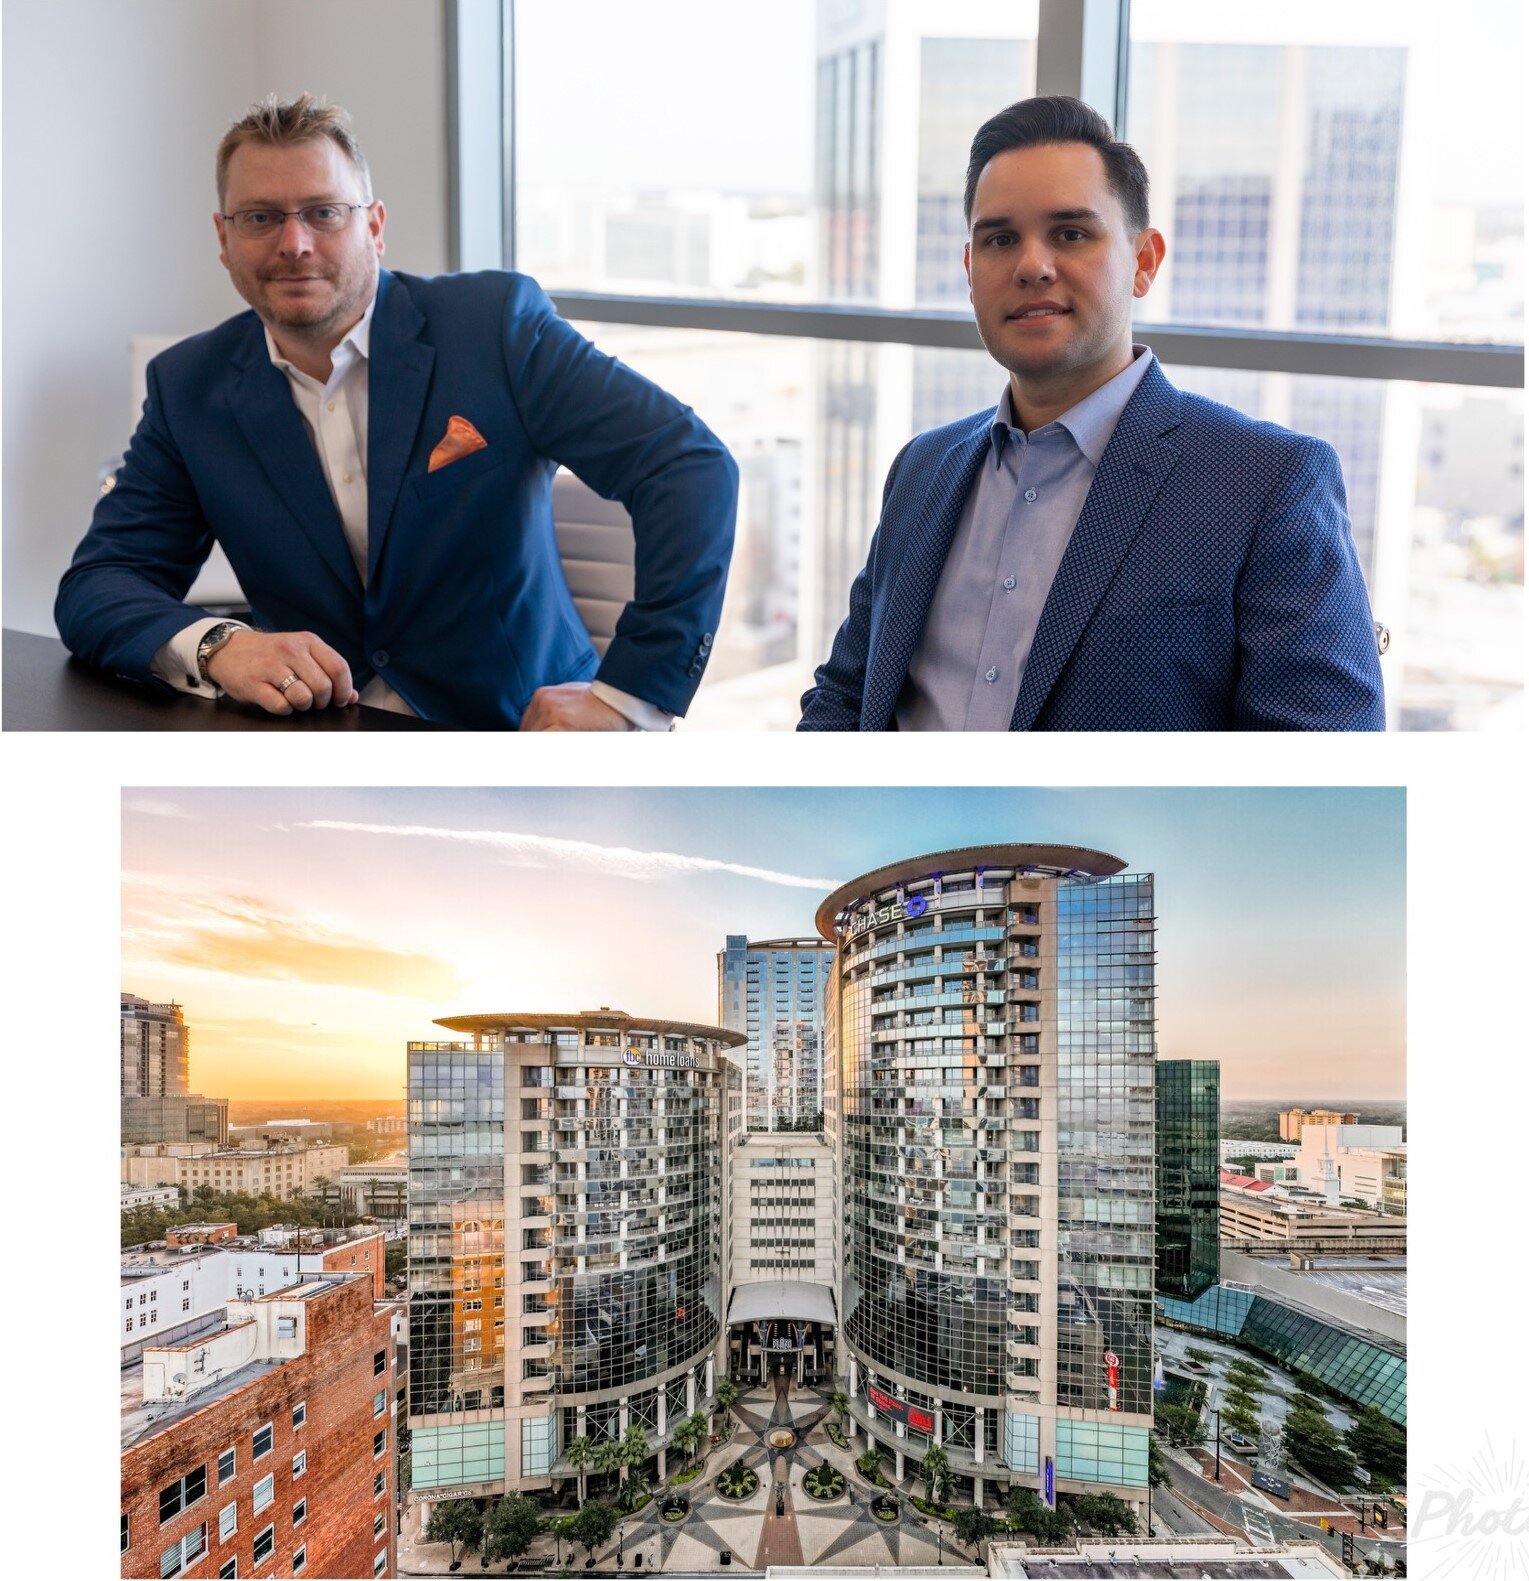 https://www.worldpropertyjournal.com/news-assets-2/The%20Plaza%20Twin%20Office%20Towers%20in%20Downtown%20Orlando.jpg